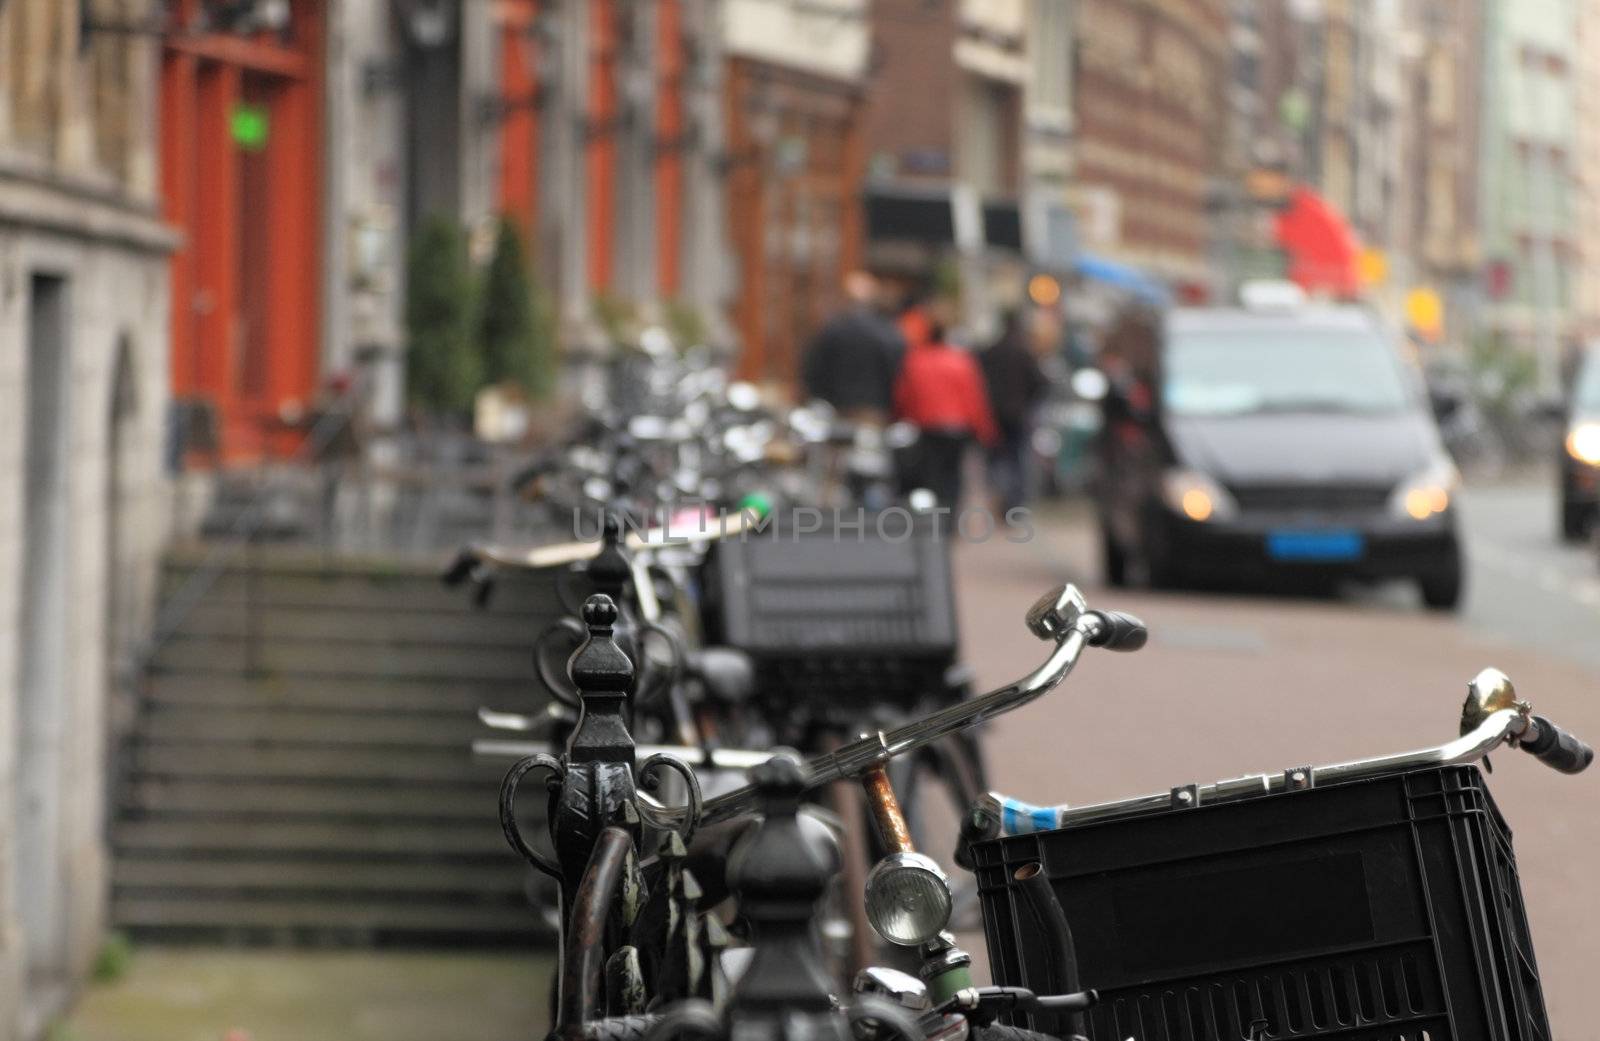 Image of crowded bicycles on a fence in a street of Amsterdam, Holland.